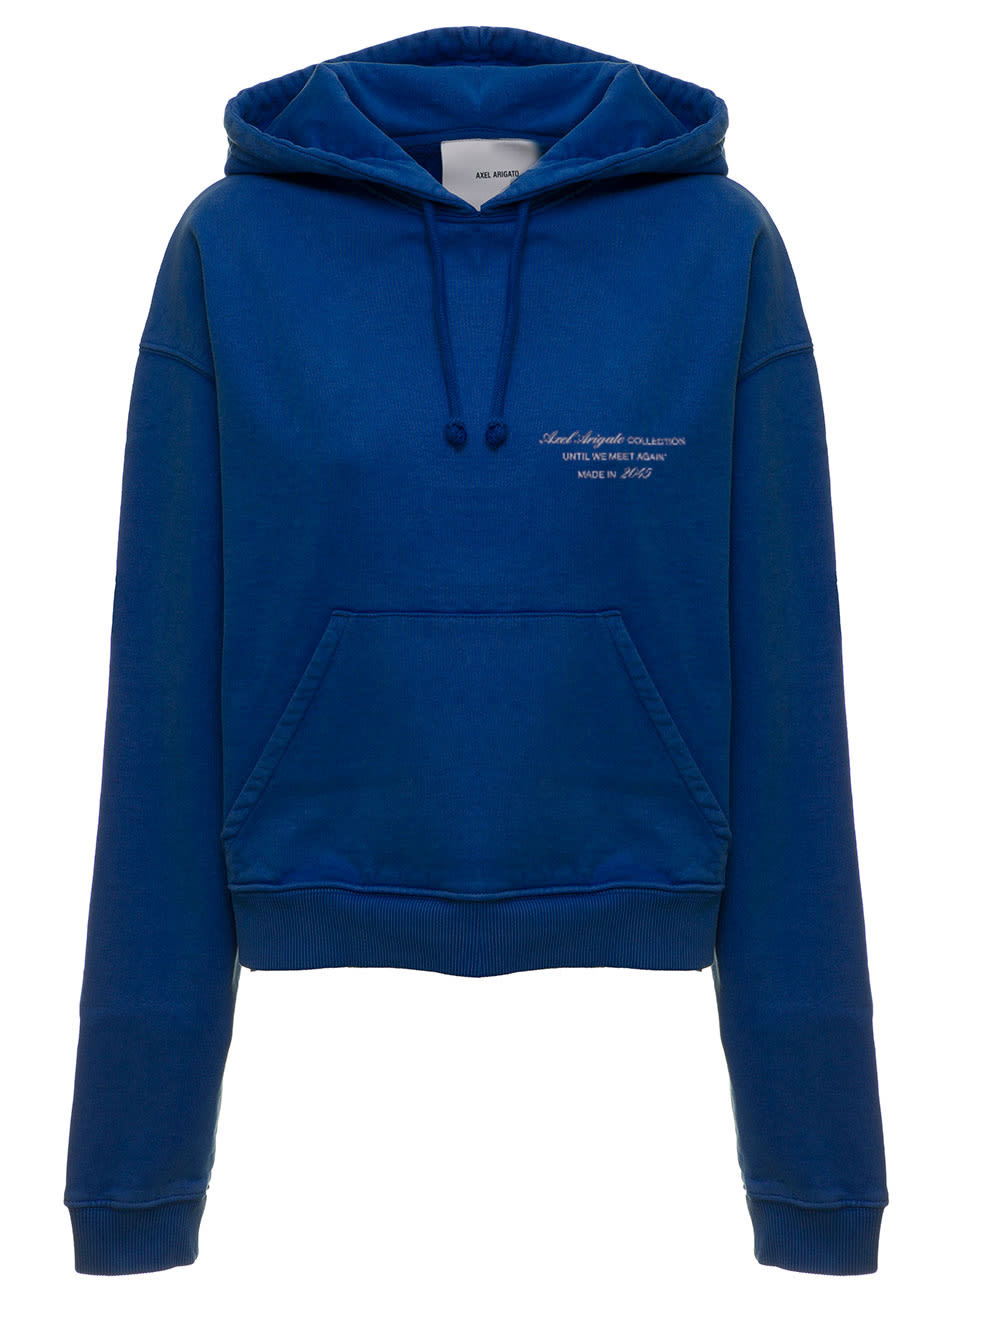 Axel Arigato Woman s Blue Jersey Hoodie With Print